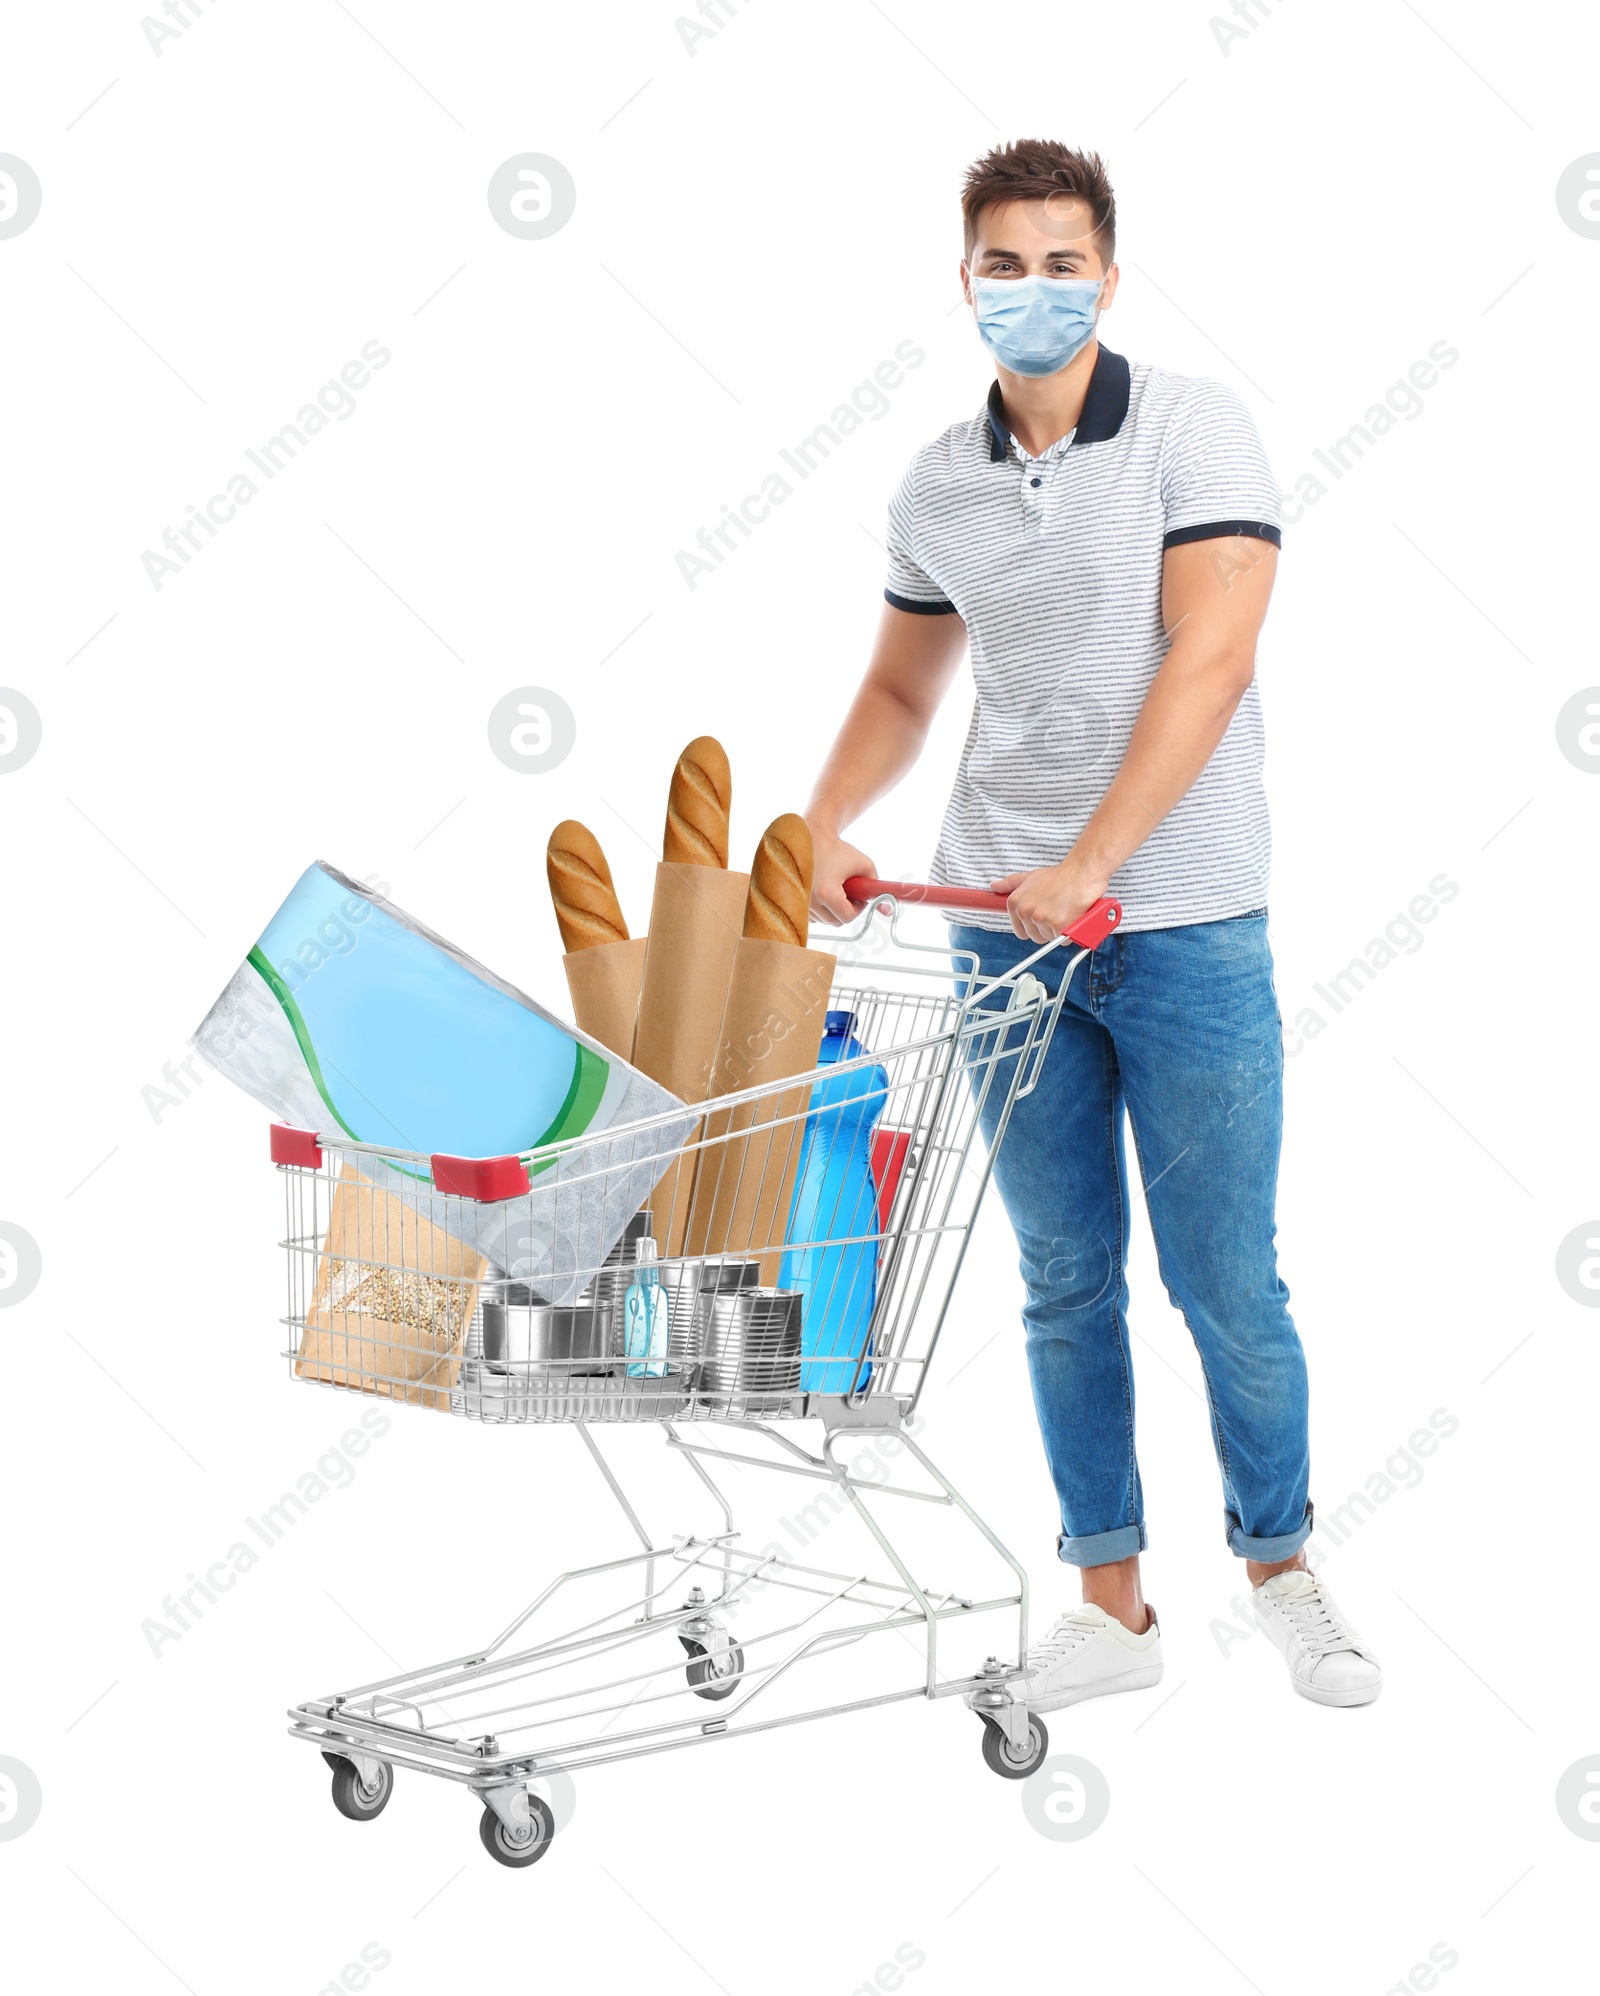 Image of Young man in medical mask and shopping cart with purchases on white background. Coronavirus pandemic  